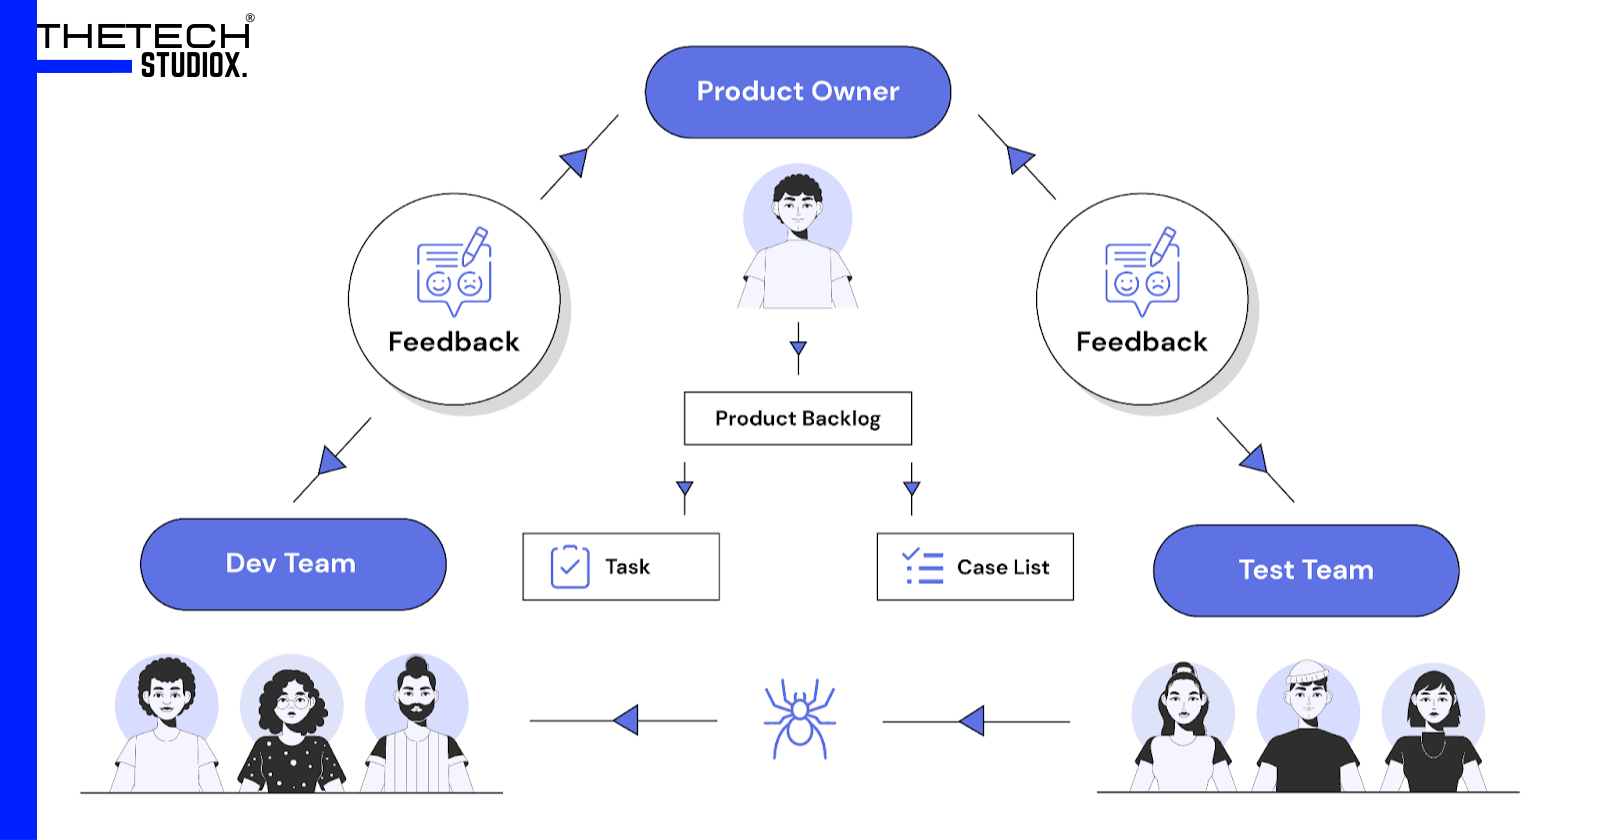 The Role of a Product Owner